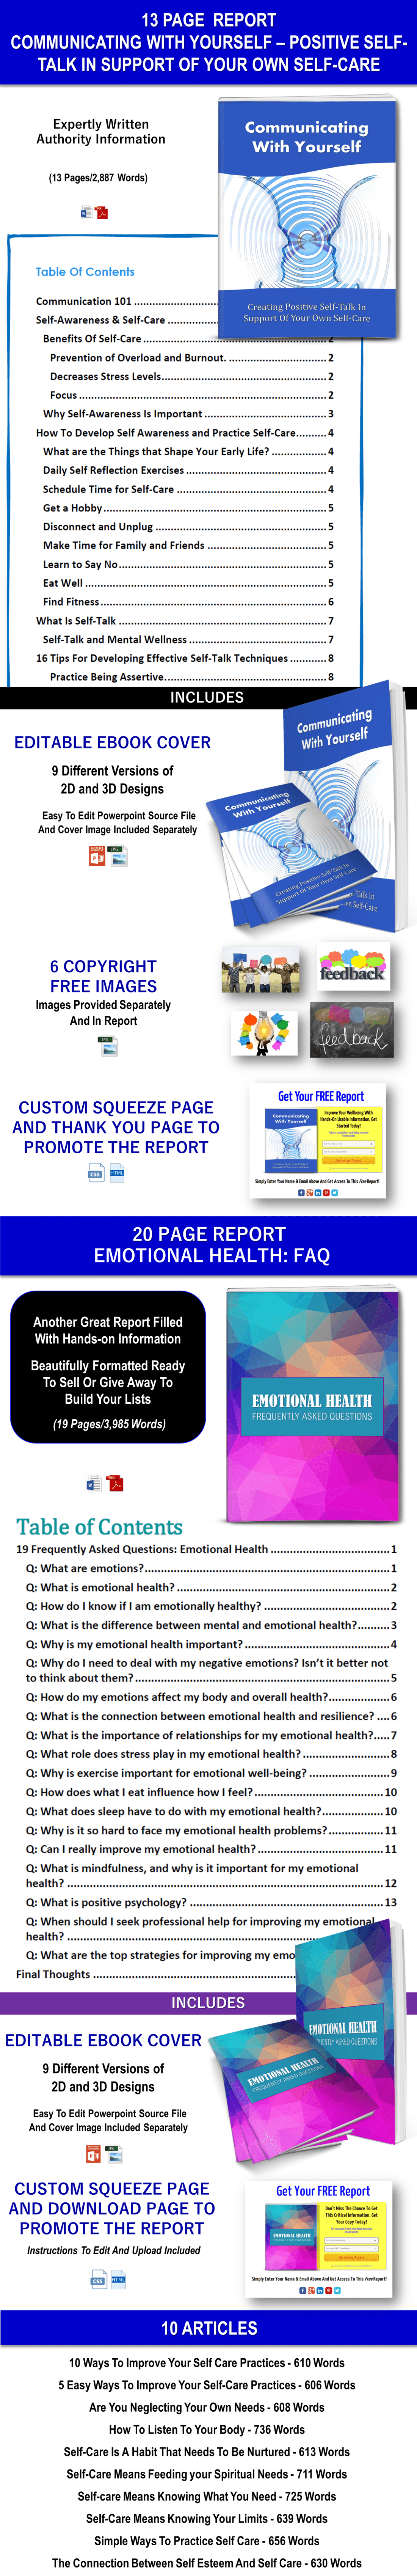 340 Affirmations And 8 Guided Meditations: Your Emotional Health Giant PLR